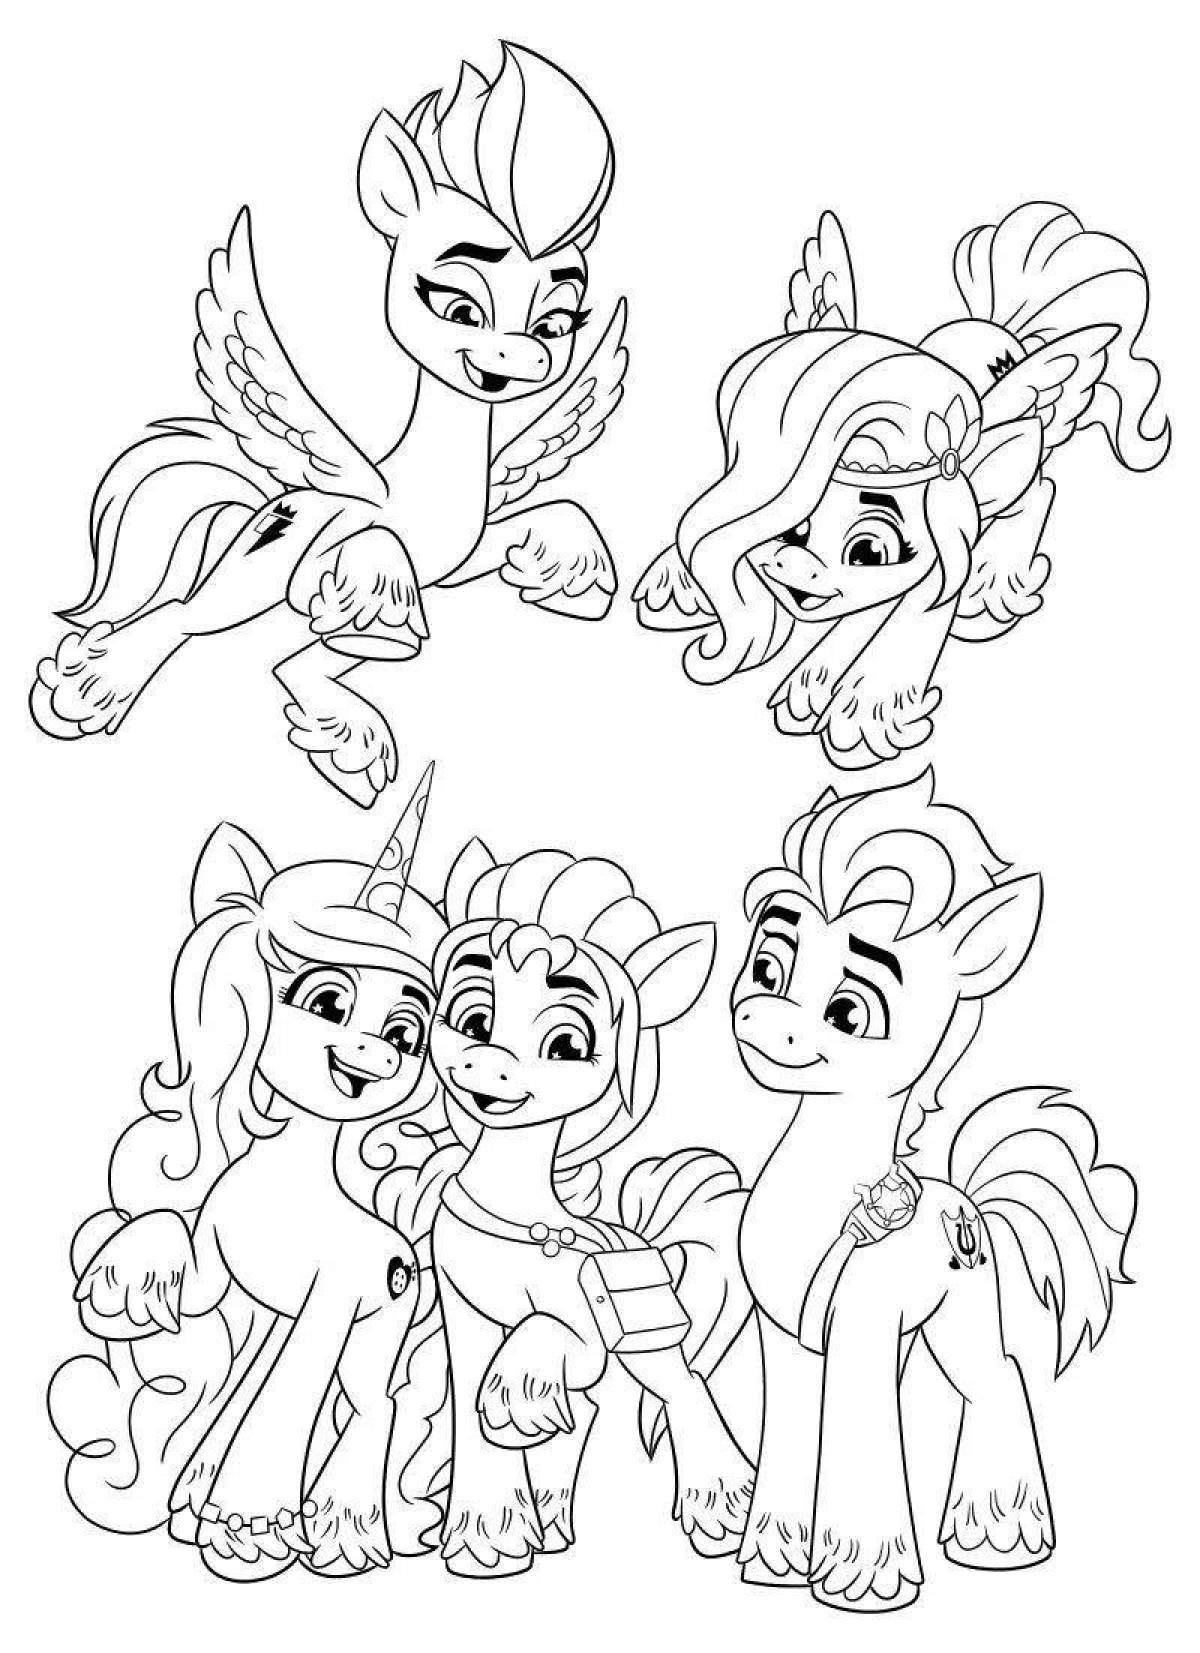 Sunny pony coloring page